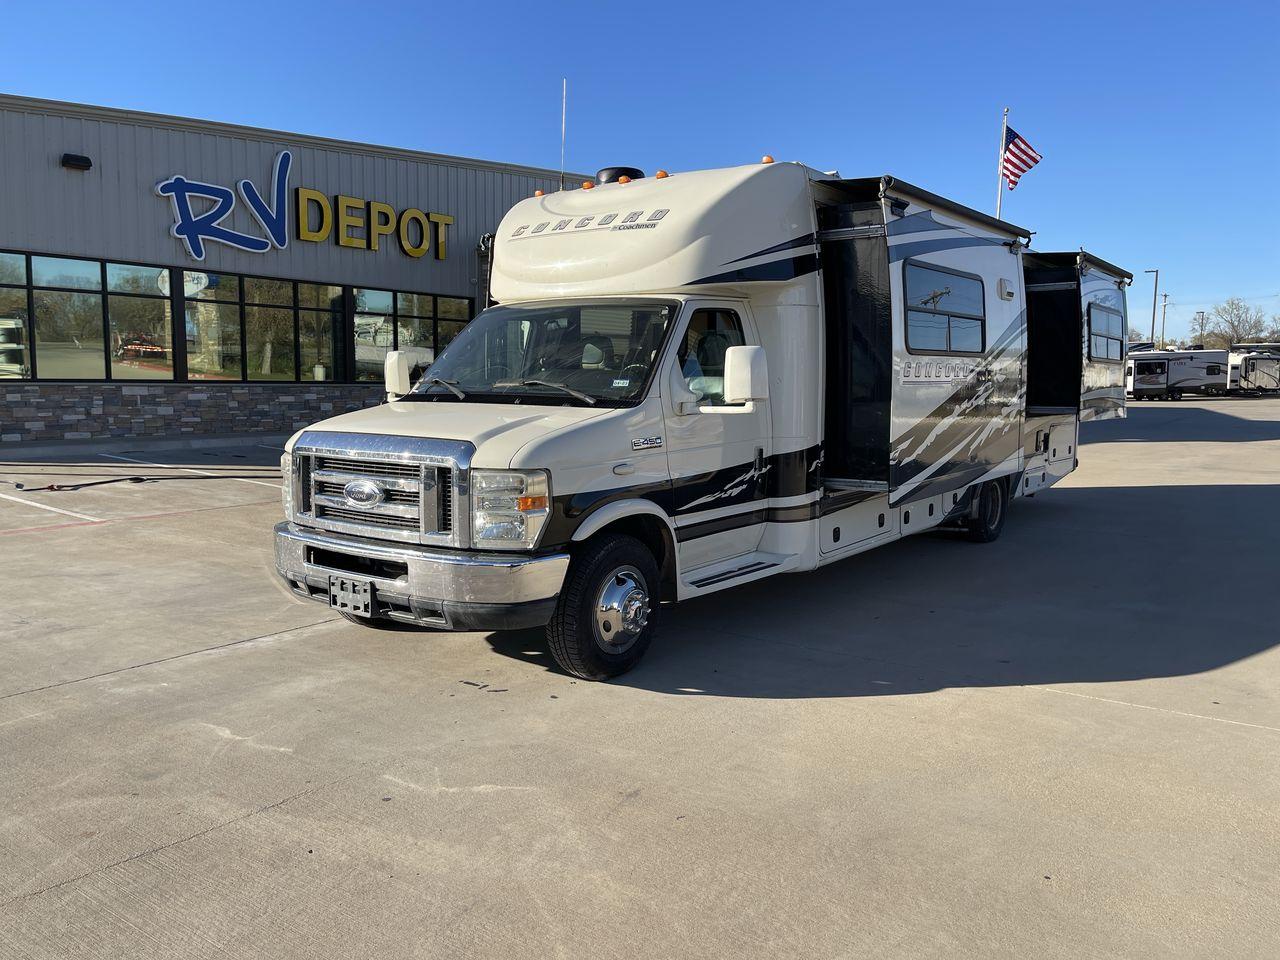 2011 WHITE COACHMEN CONCORD 300TS (1FDEX4FS9BD) , Length: 30.83 ft. | Dry Weight: 12,110 lbs. | Gross Weight: 14,500 lbs. | Slides: 3 transmission, located at 4319 N Main St, Cleburne, TX, 76033, (817) 678-5133, 32.385960, -97.391212 - The 2011 Coachmen Concord 300TS, a class C motorhome that redefines travel comfort and convenience. With a length of 31 feet, this well-maintained model is built on a Ford E450 chassis, powered by a dependable Triton V10 engine, ensuring a smooth and reliable journey. The Concord 300TS features thre - Photo #0